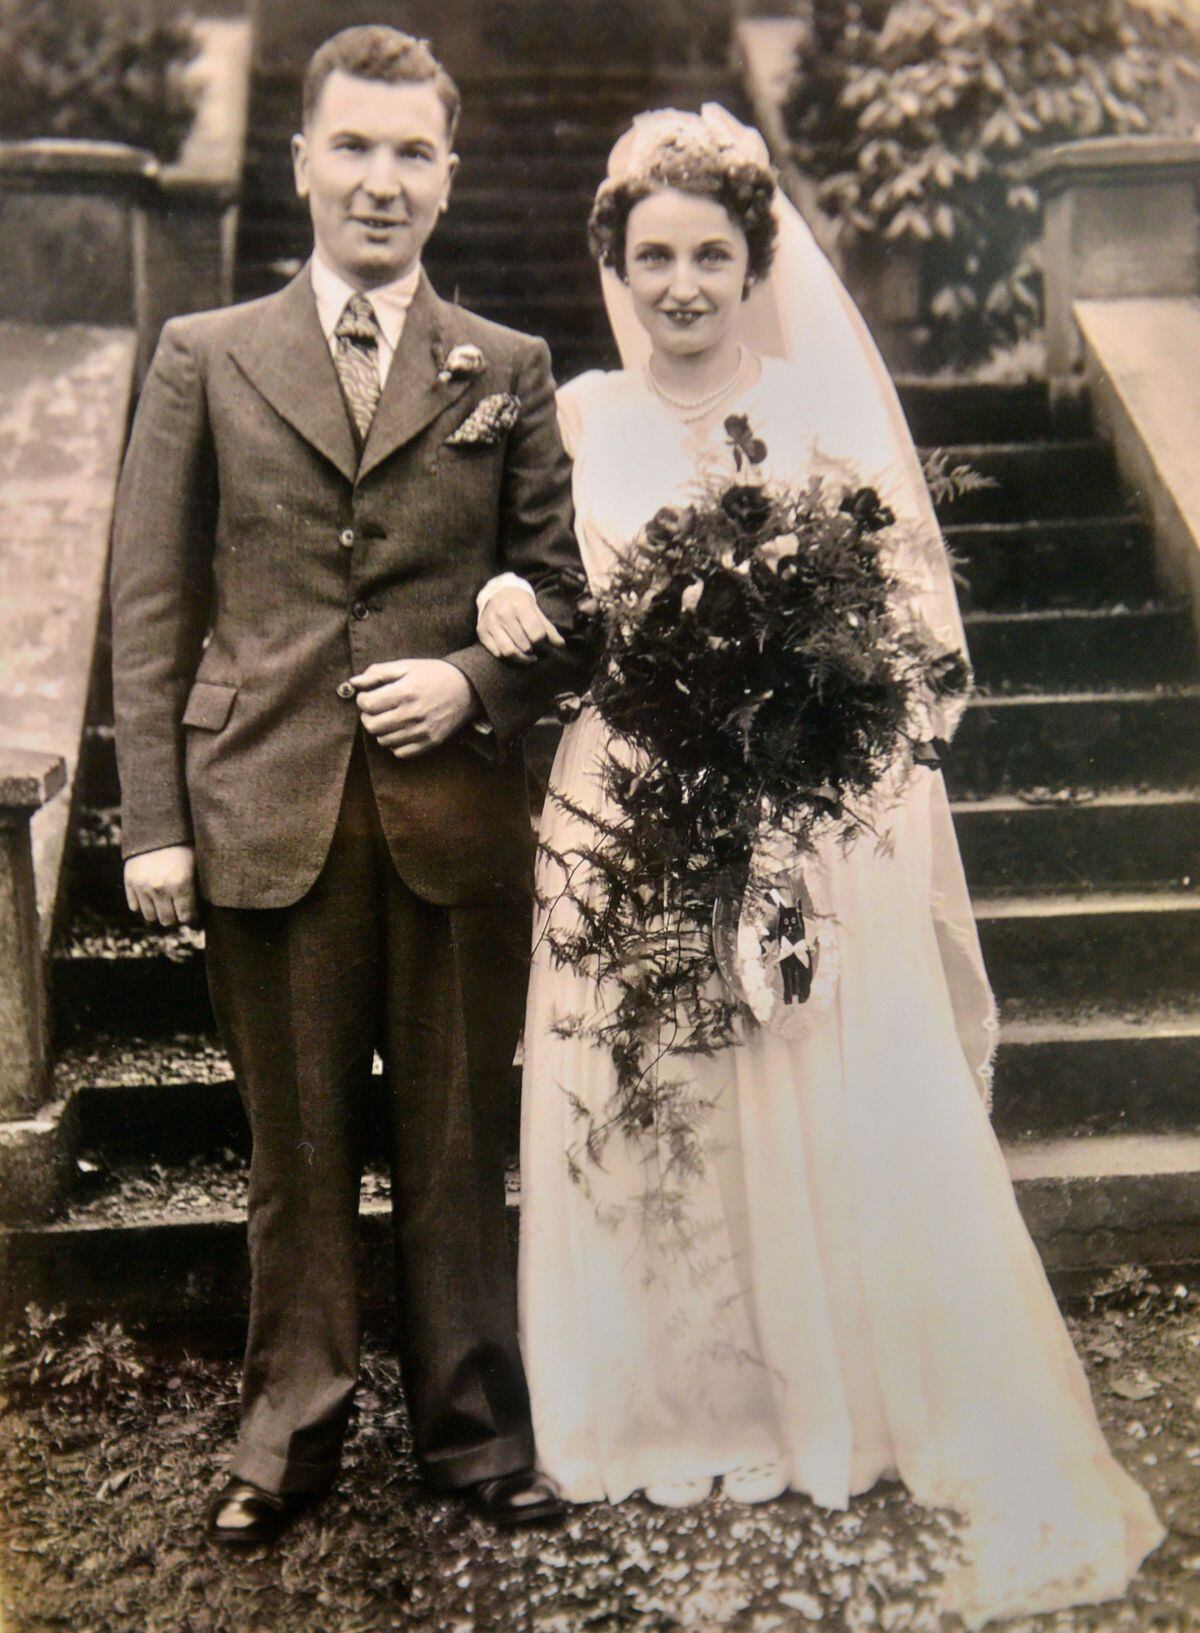 Ida is pictured with her husband Thomas on their wedding day in 1950